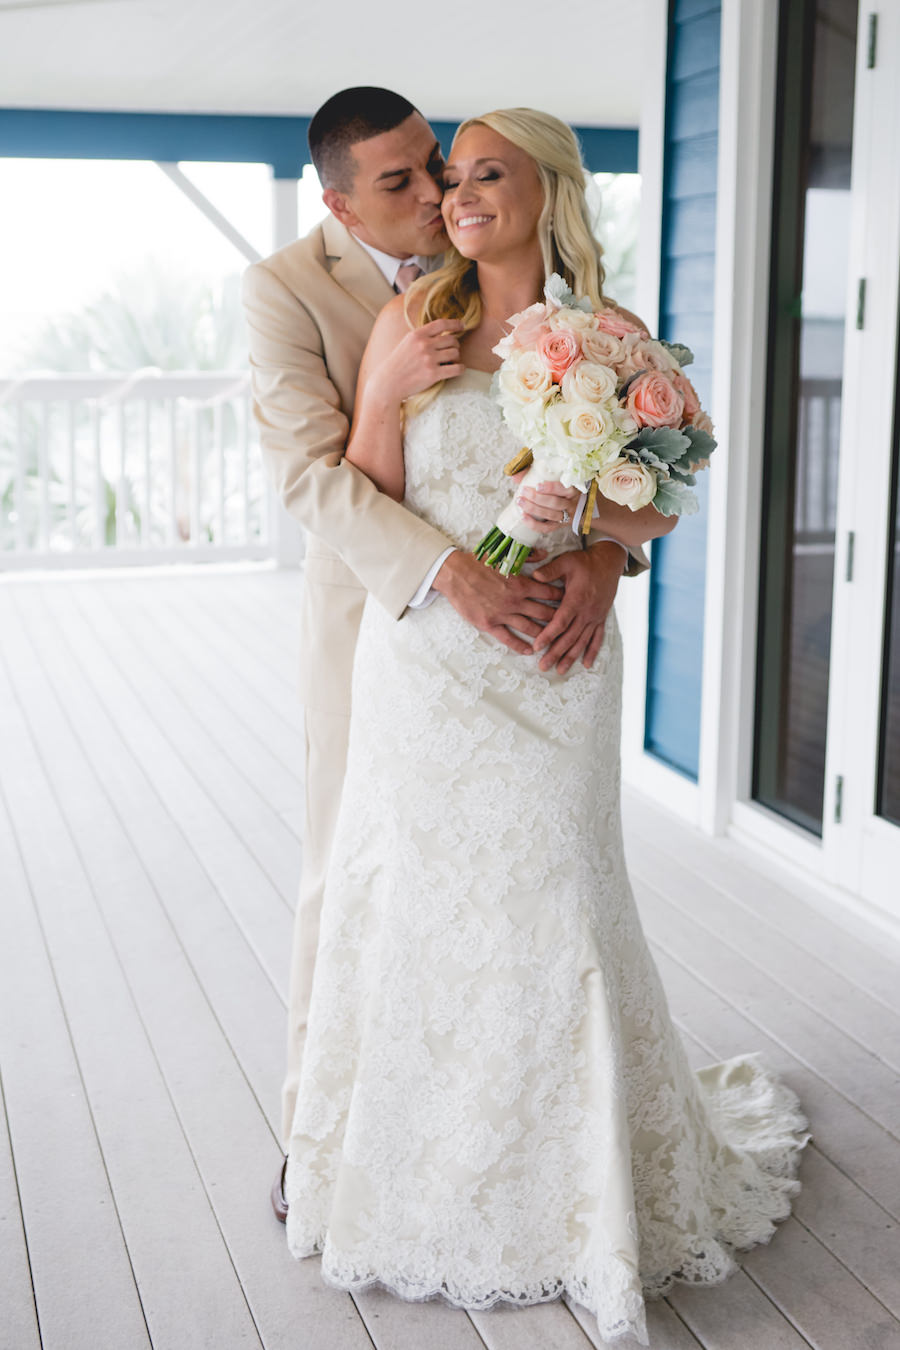 Bride and Groom, Outdoor Wedding Portrait in Lace, Ivory Modern Trousseau Wedding Dress and Tan Groom's Suit